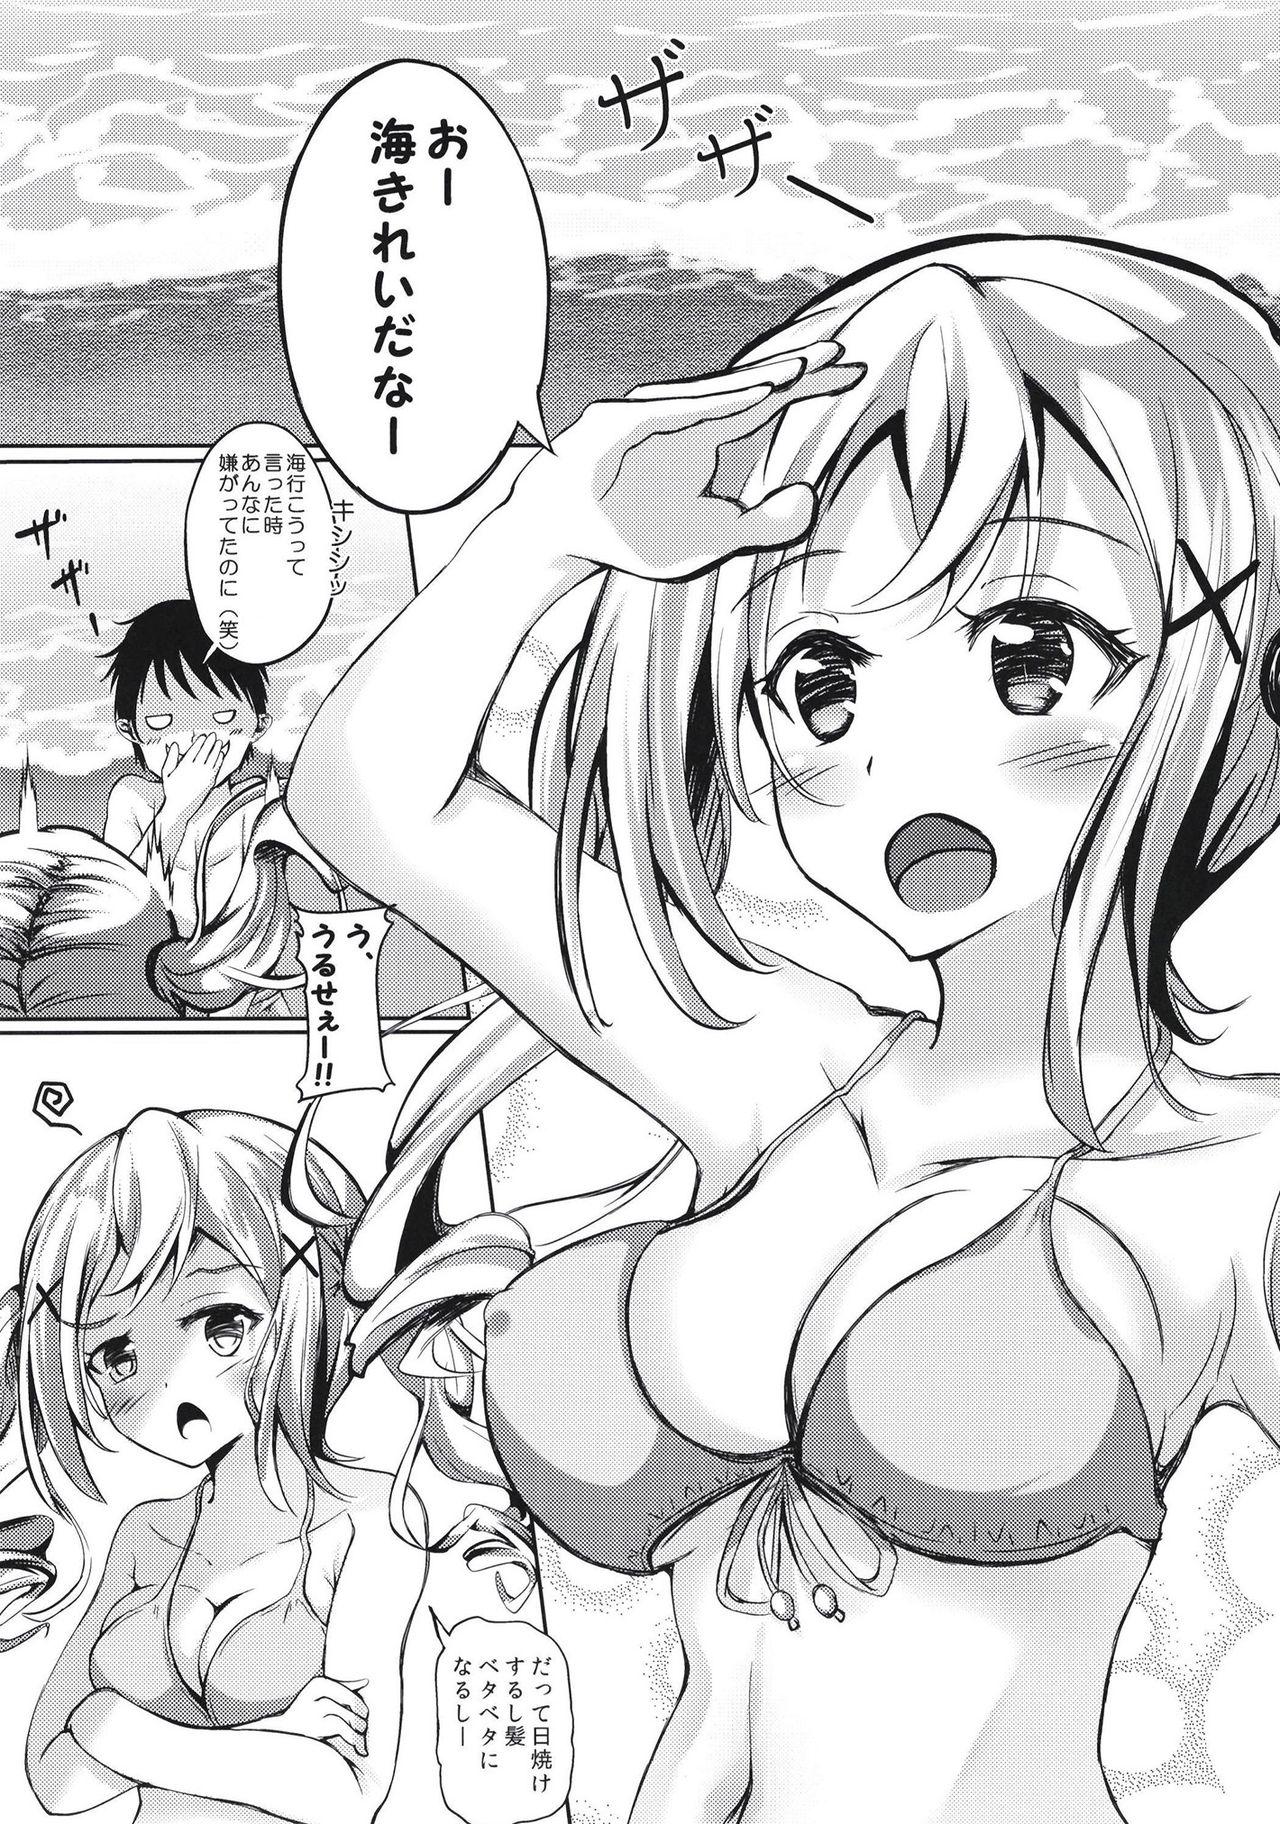 Milfsex private ~episode arisa 1.5 - Bang dream Stepfather - Page 3